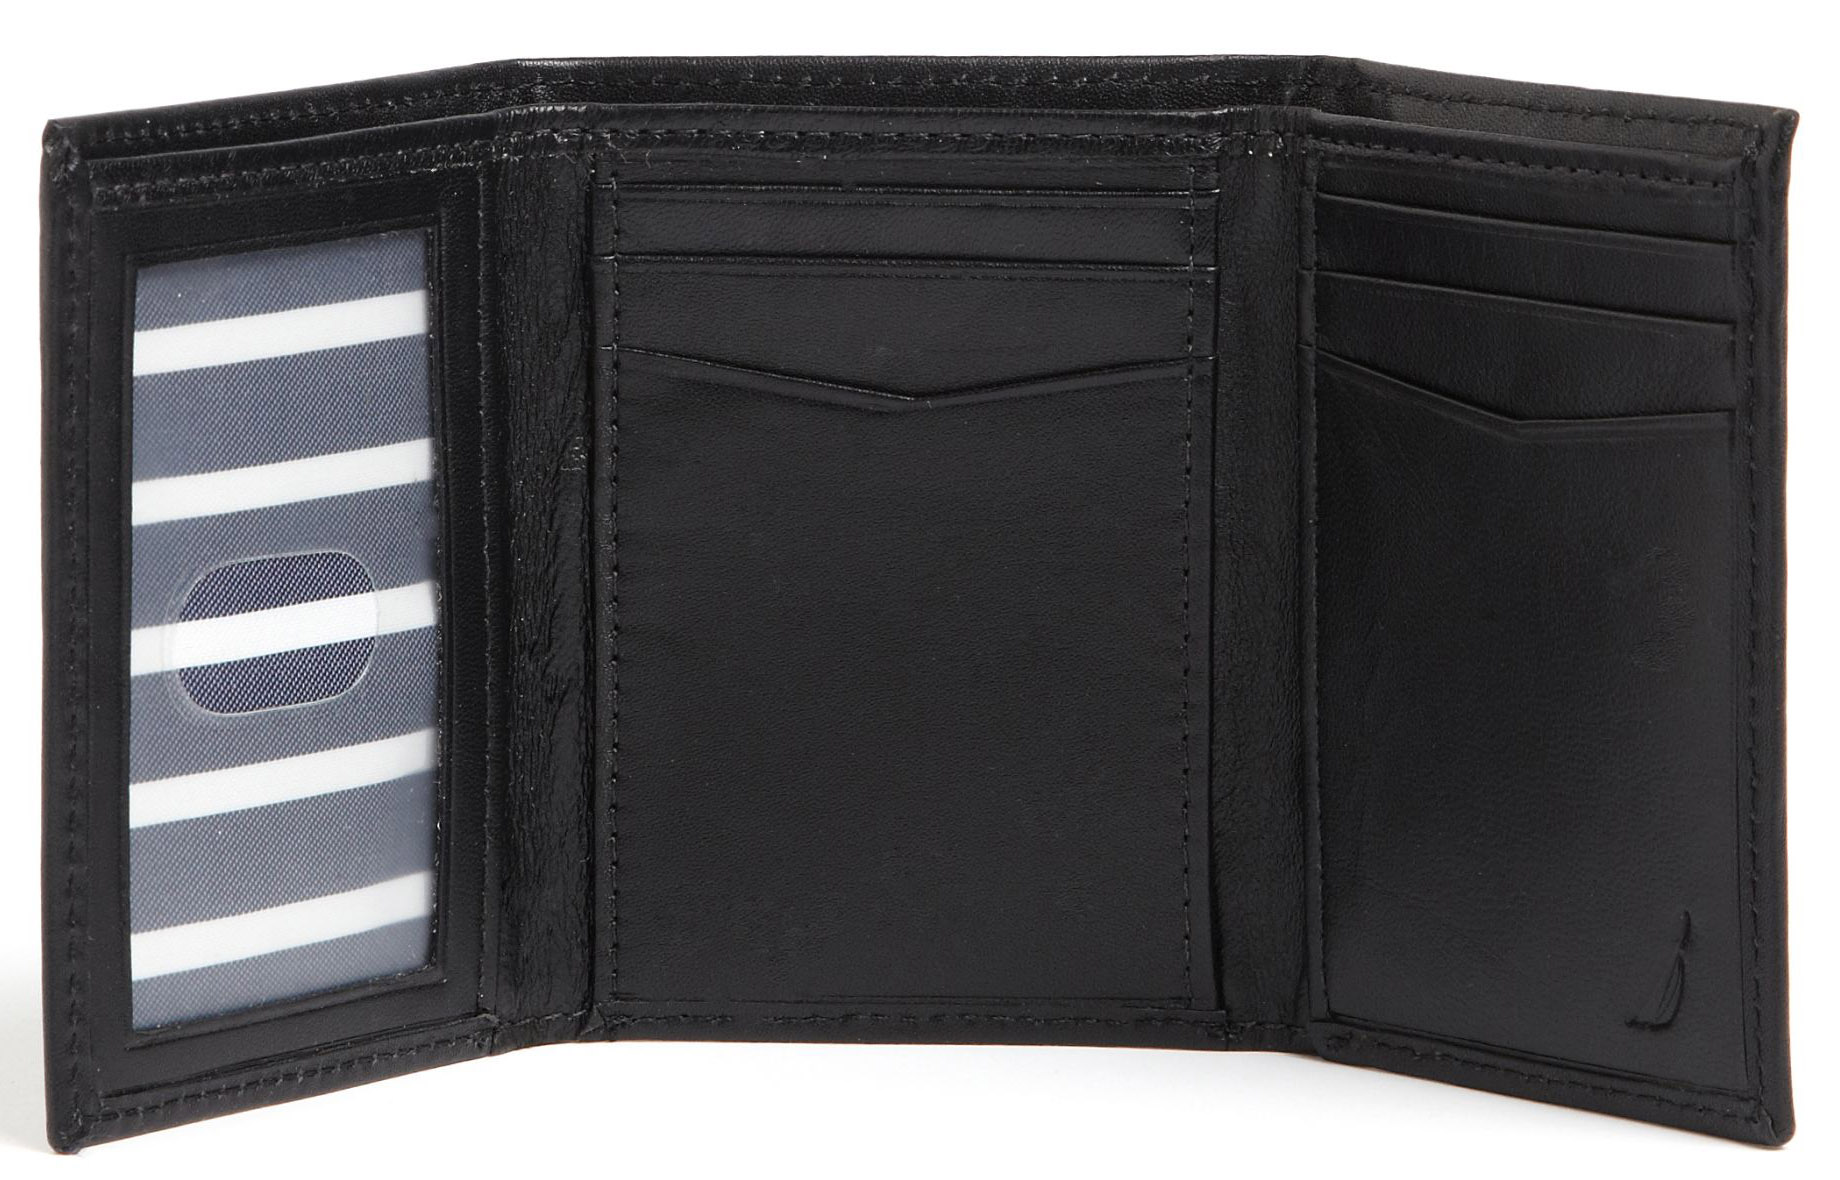 NAUTICA MEN&#39;S LEATHER CREDIT CARD PASSCASE TRIFOLD WALLET - BLACK 6292-02 - NEW | eBay